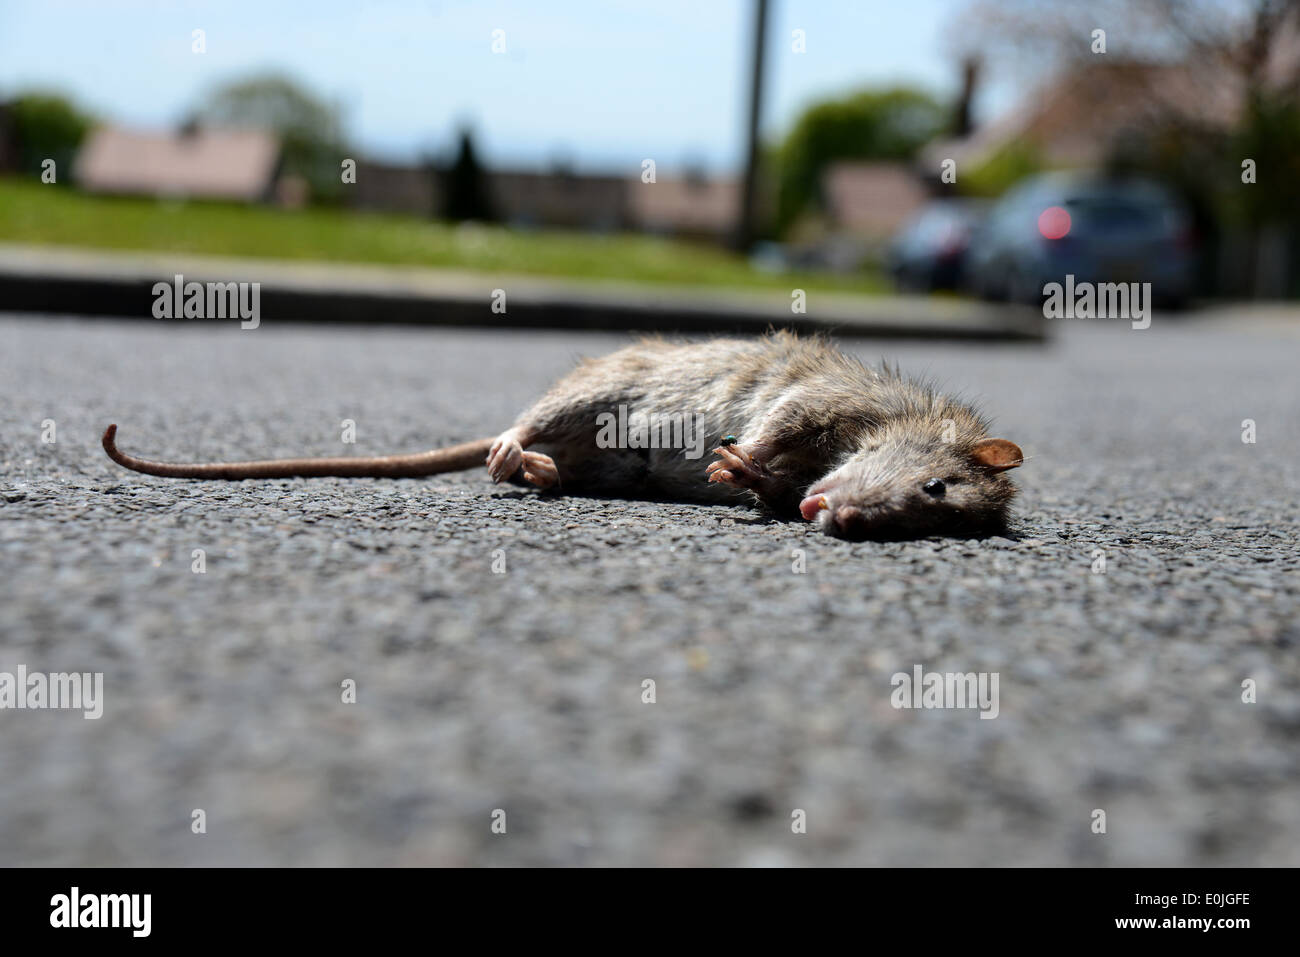 A giant rat pictured on the street in a residential area of Woodingdean, Brighton, East Sussex, UK. Stock Photo